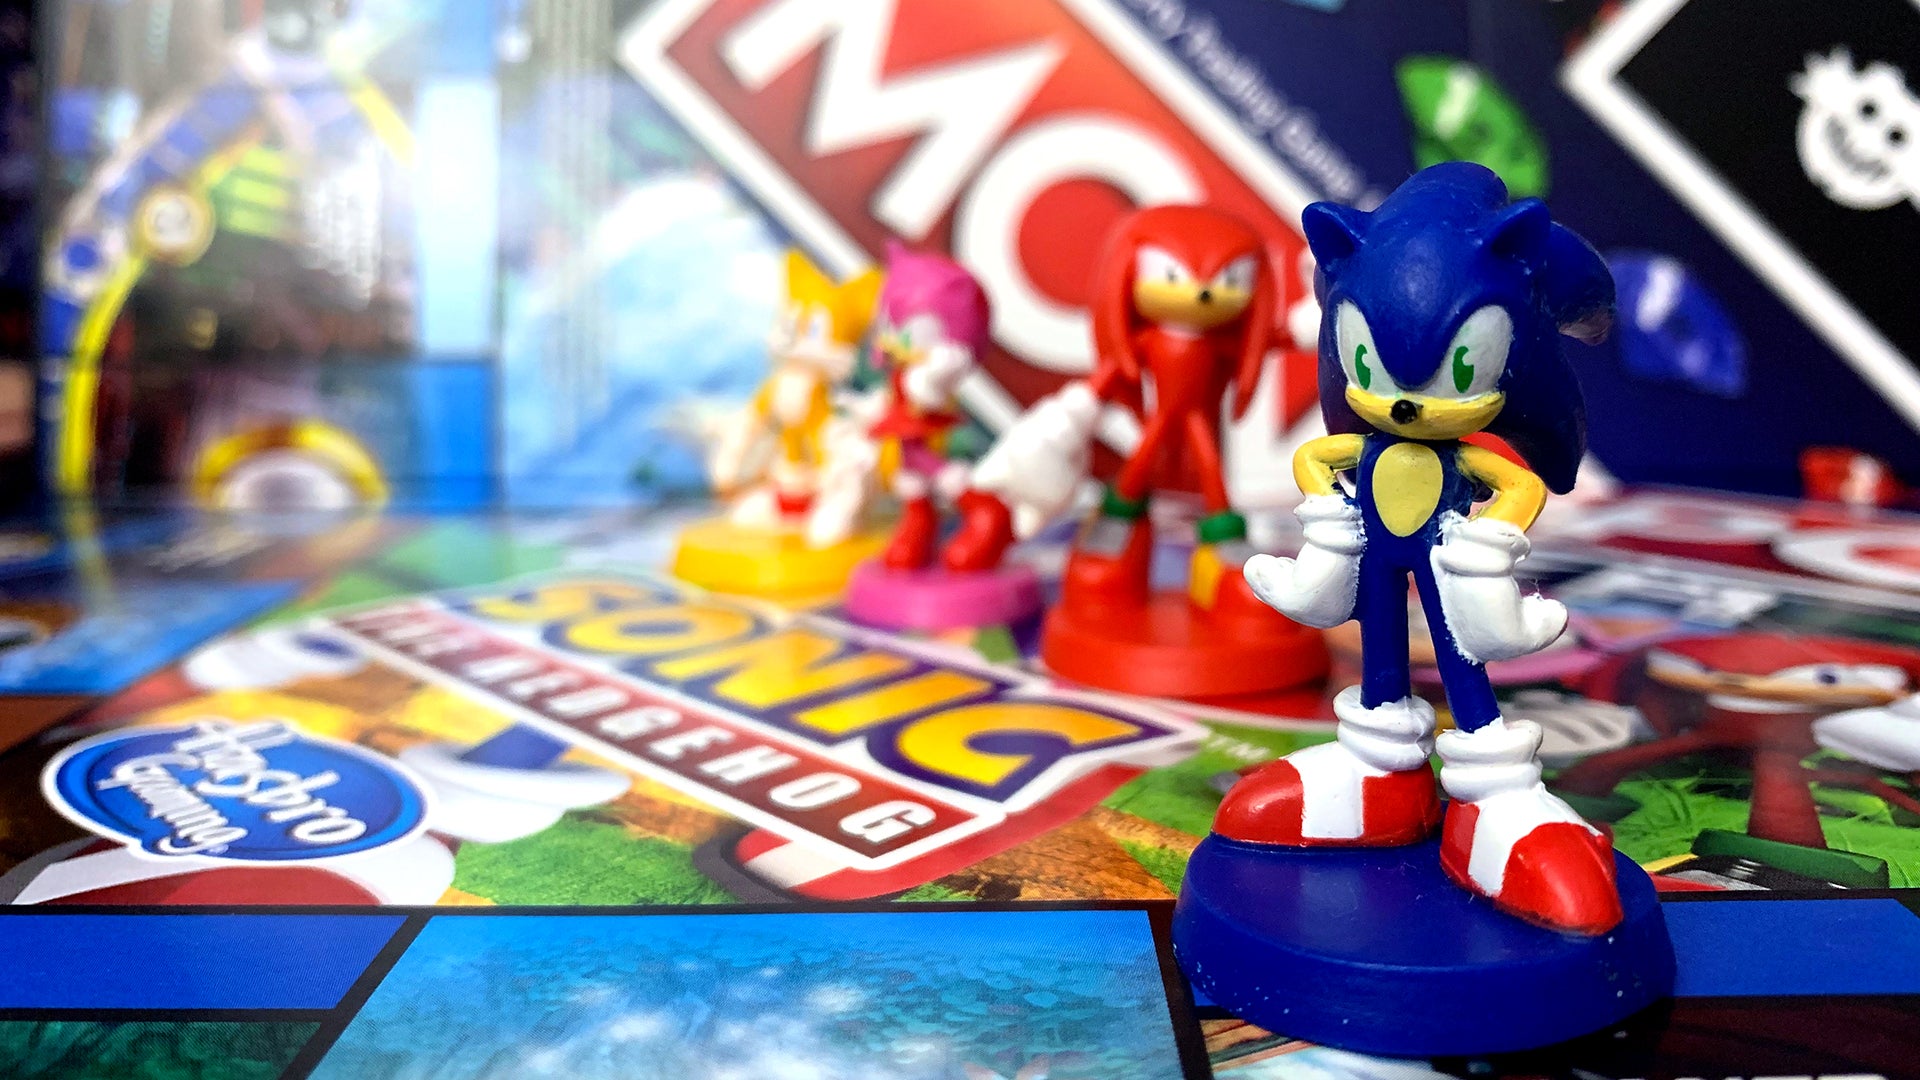 The New Sonic The Hedgehog Monopoly Game Is About Going Fast And Battling Bosses